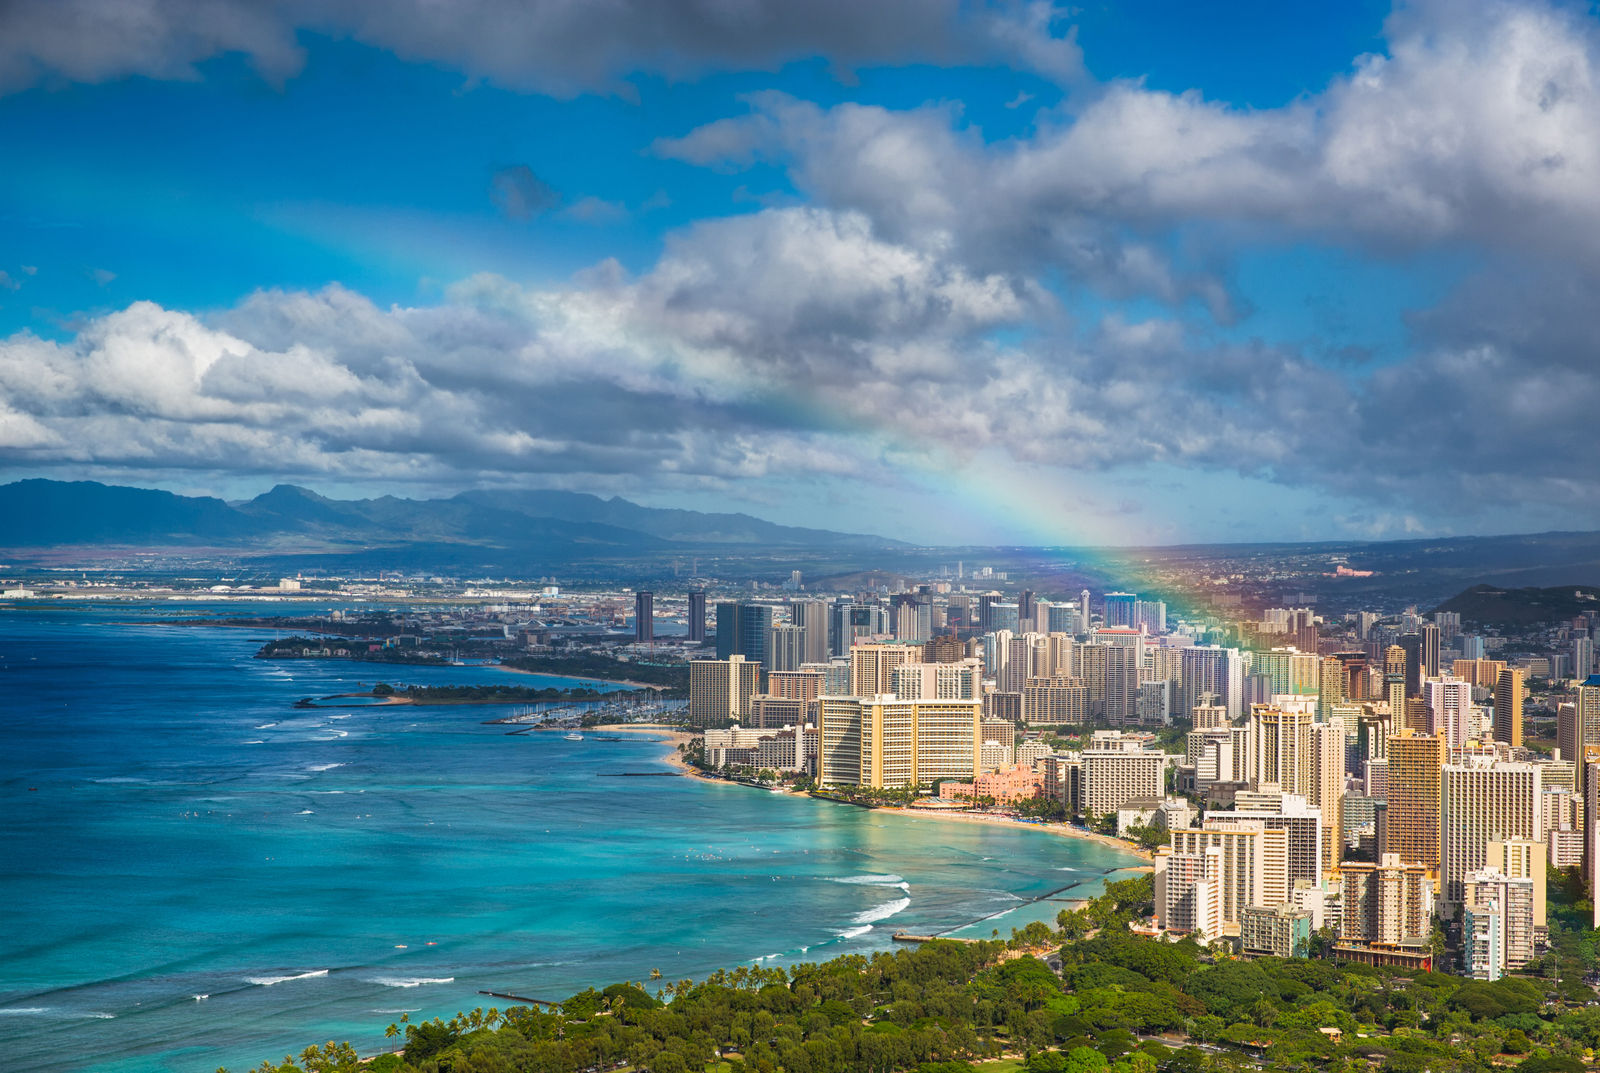 According to a WalletHub study, Hawaii is the happiest state. (Getty Images/iStockphoto/rebelml)